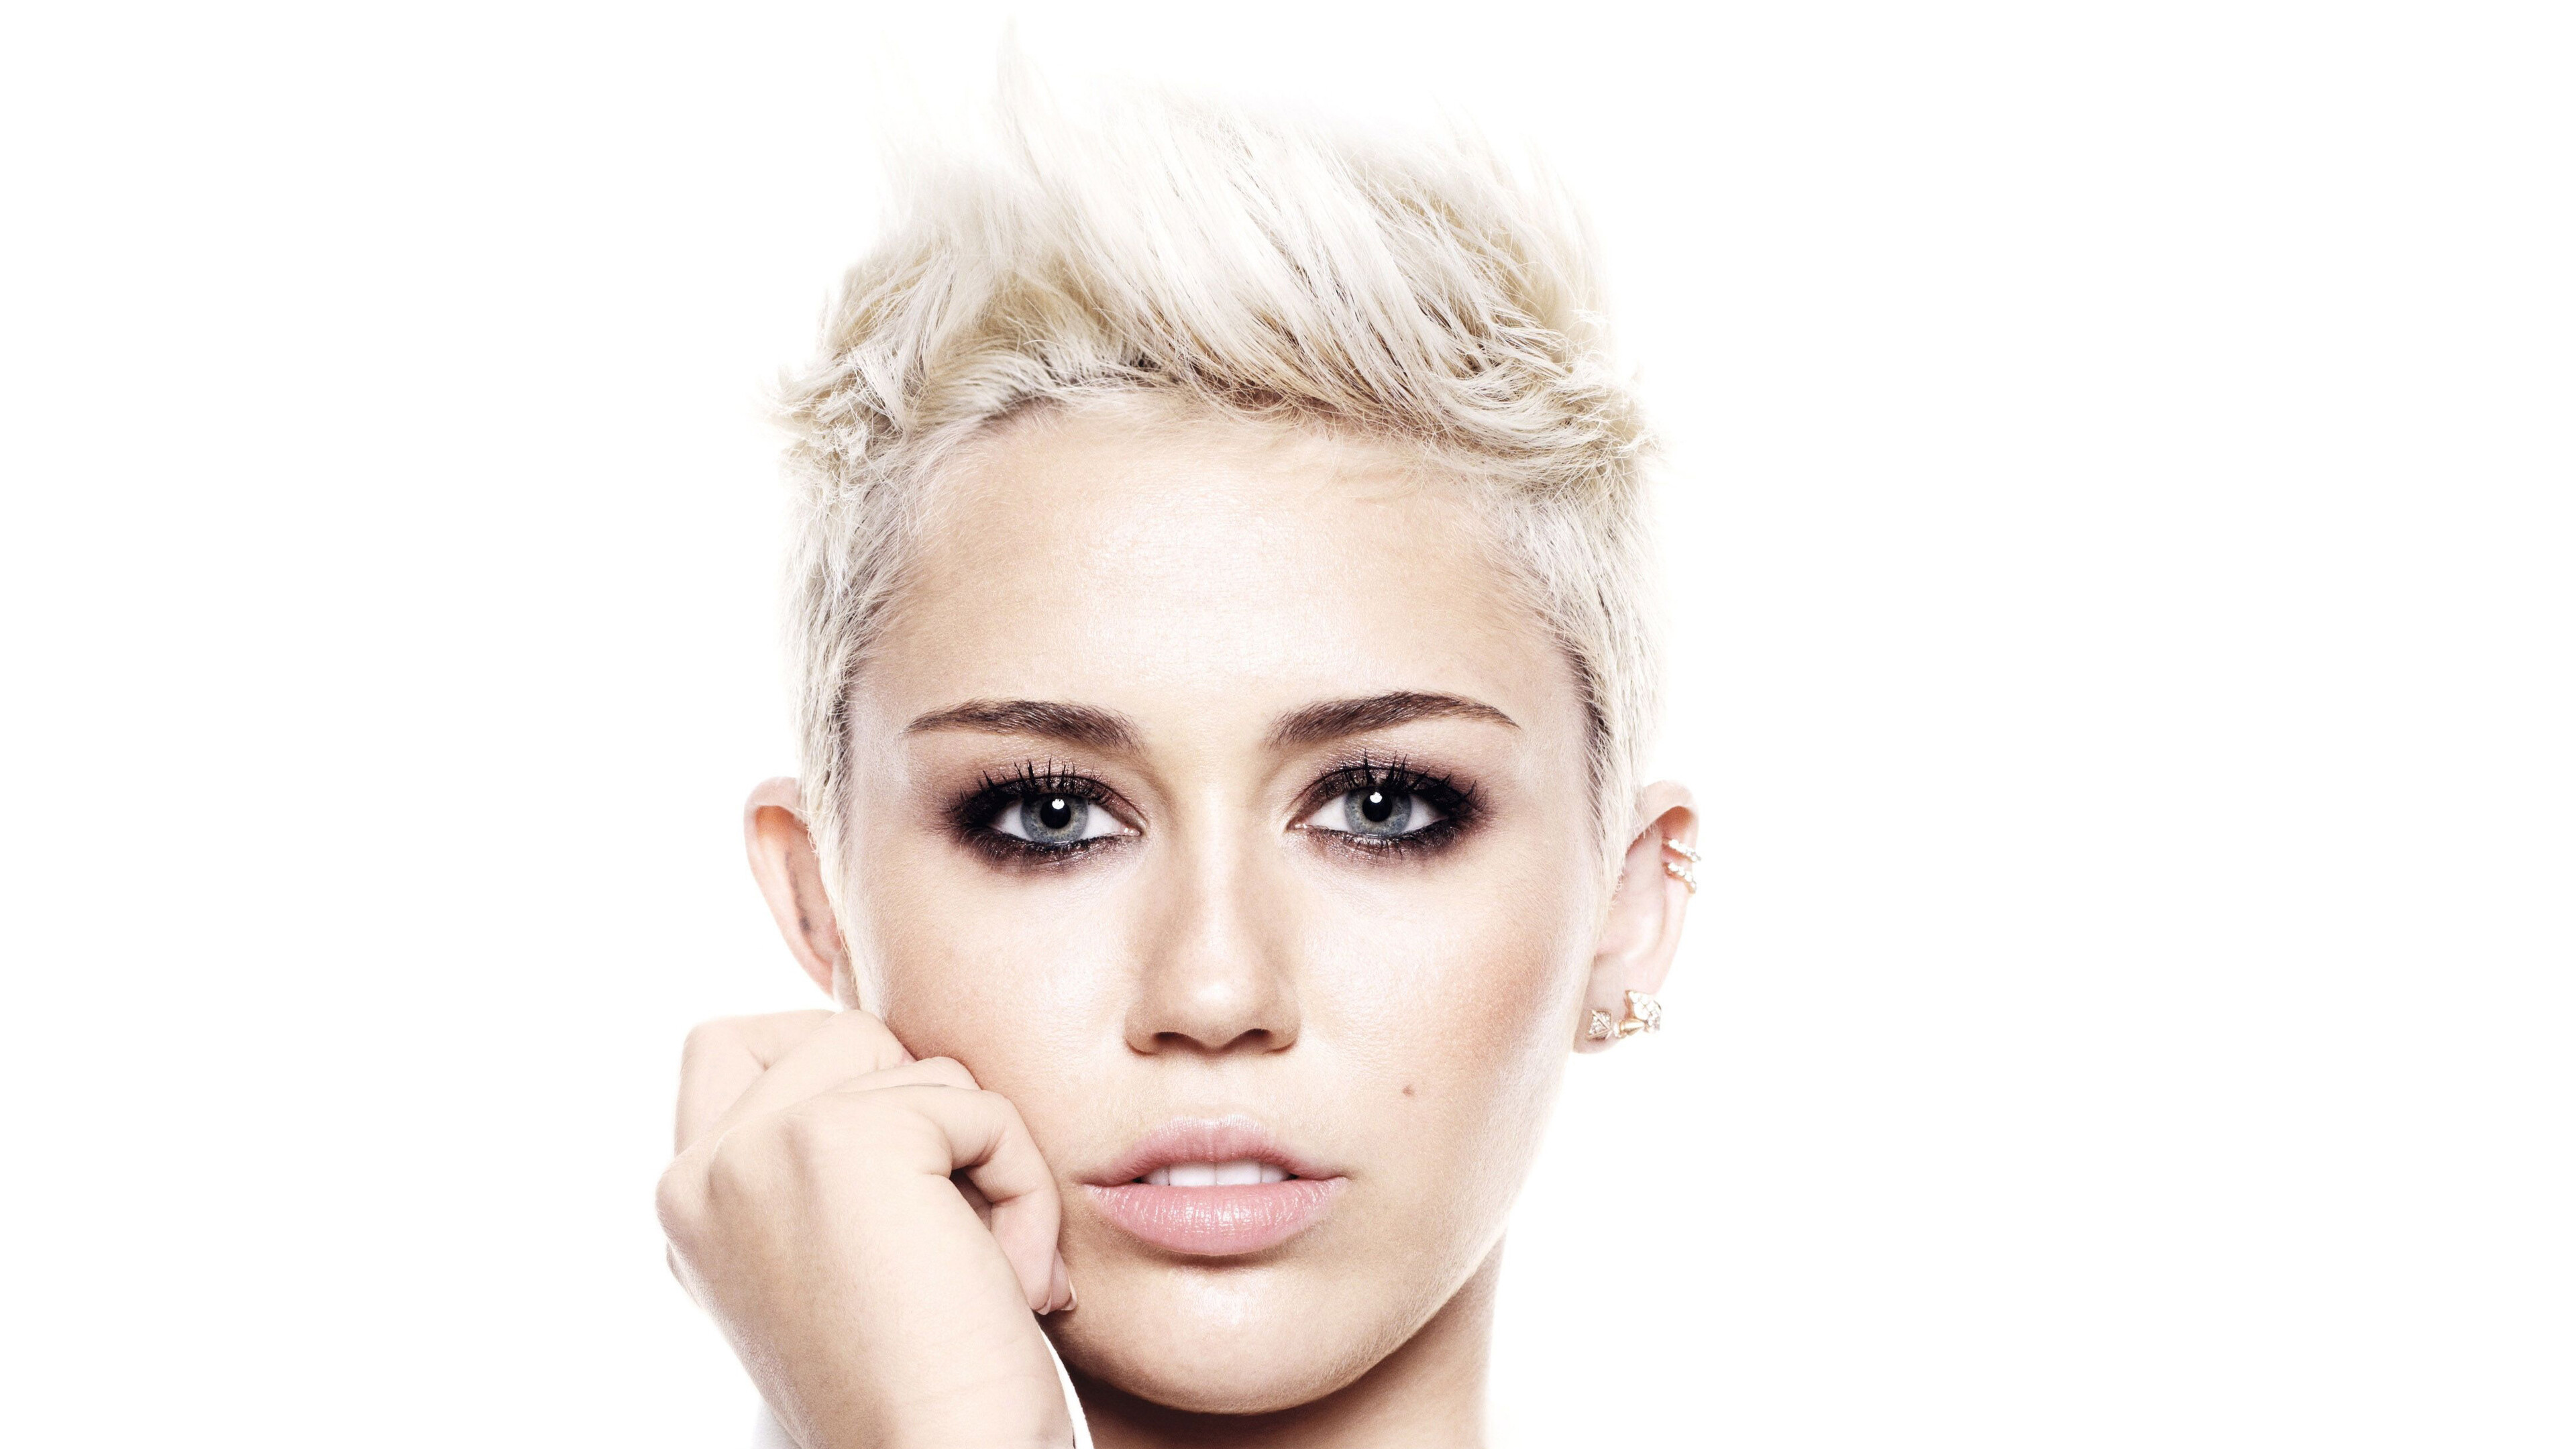 Miley Cyrus Face 2020 Wallpapers